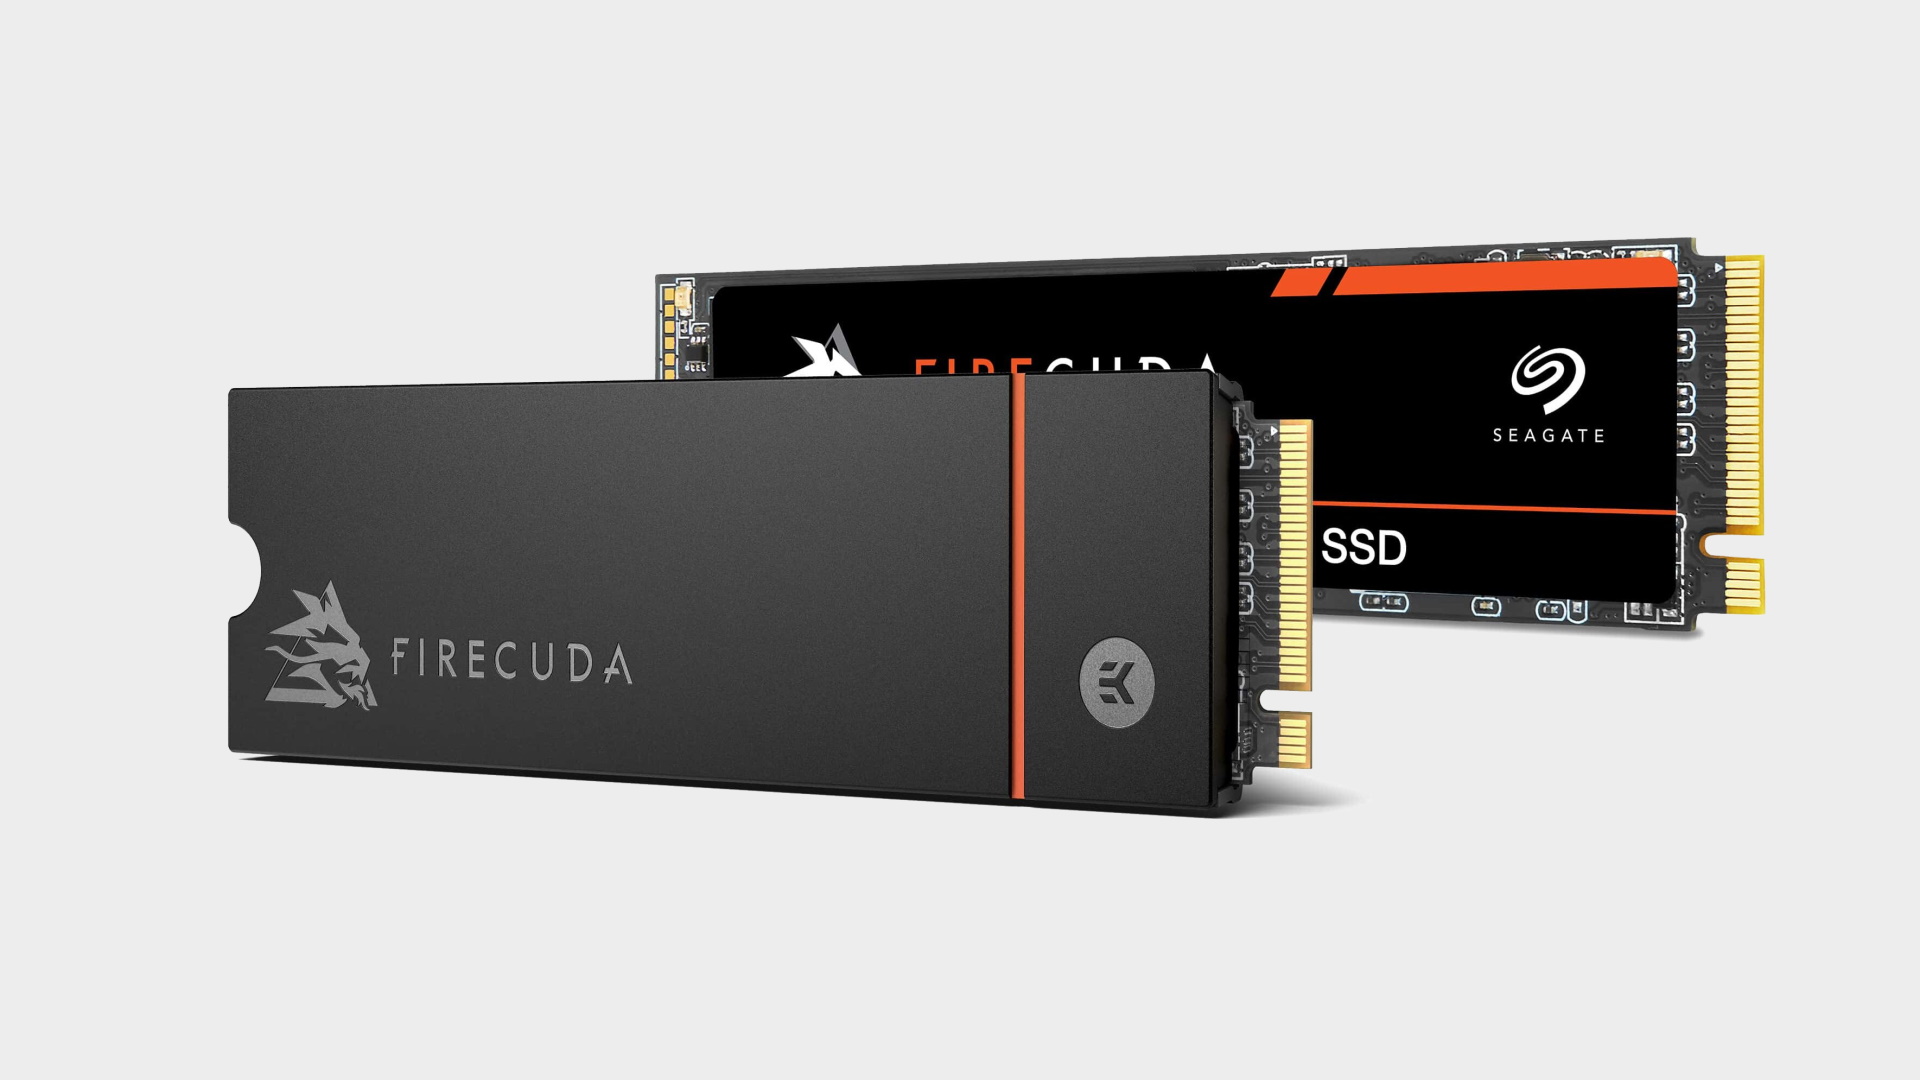 Seagate FireCuda 530 SSD with and without heatsink